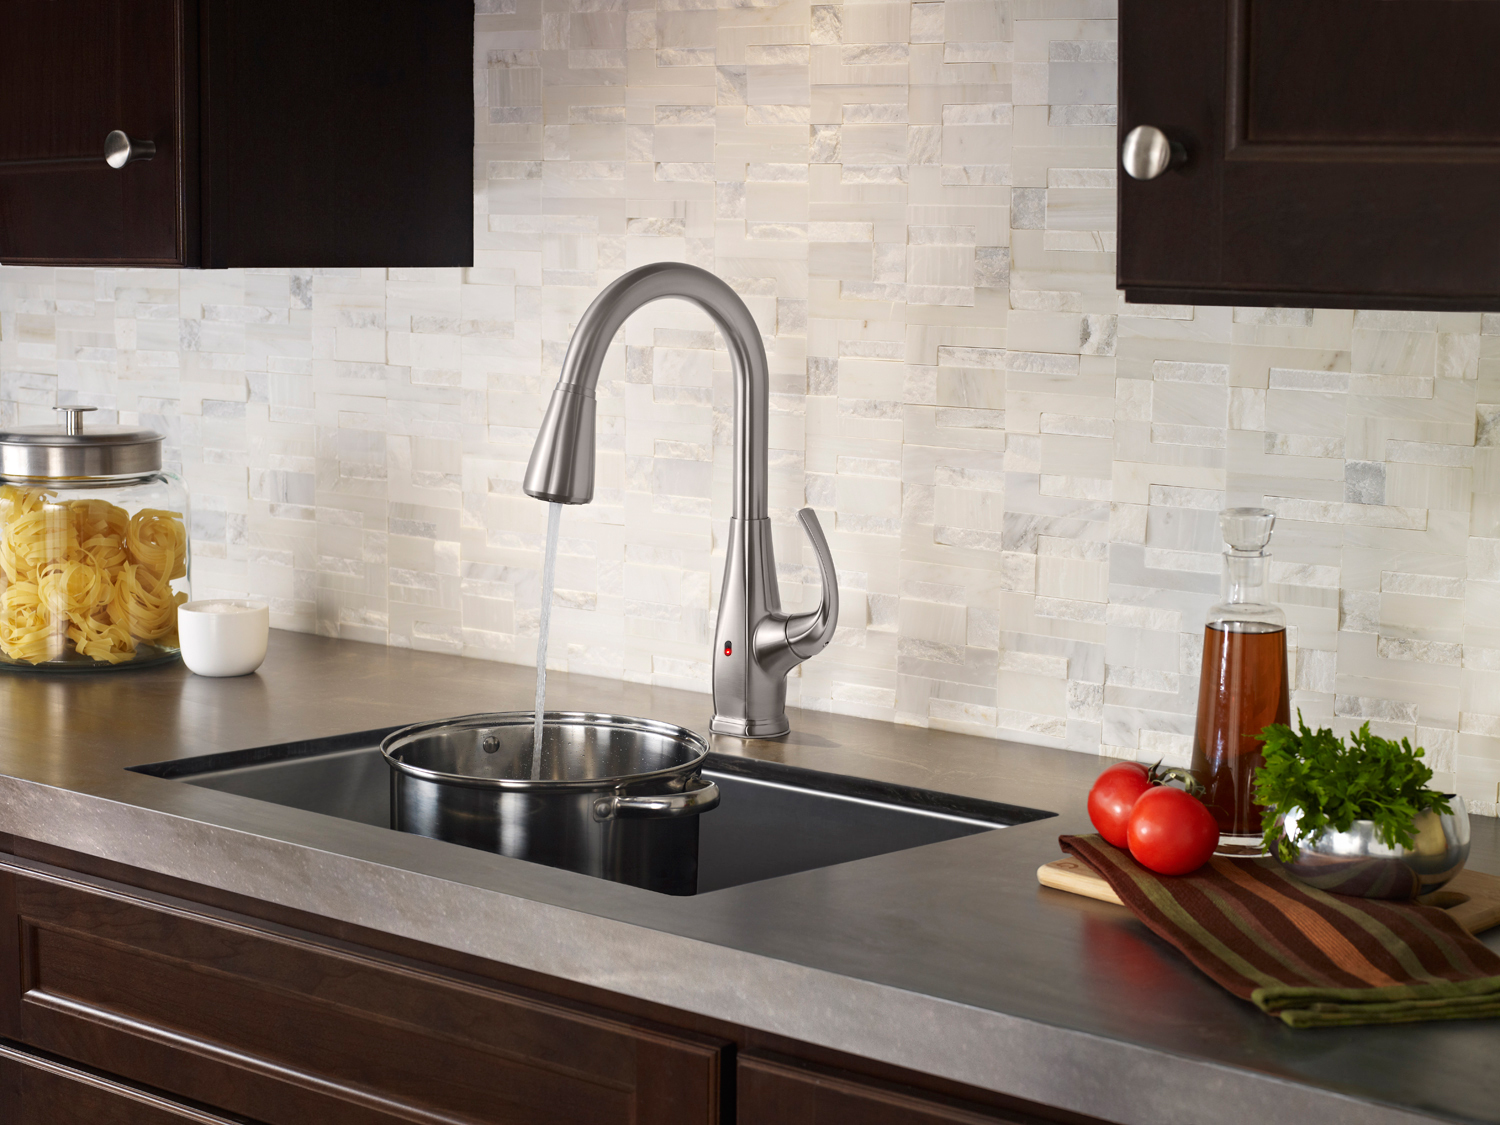 Pfister React Touch Free Kitchen Faucets Offer Purposeful